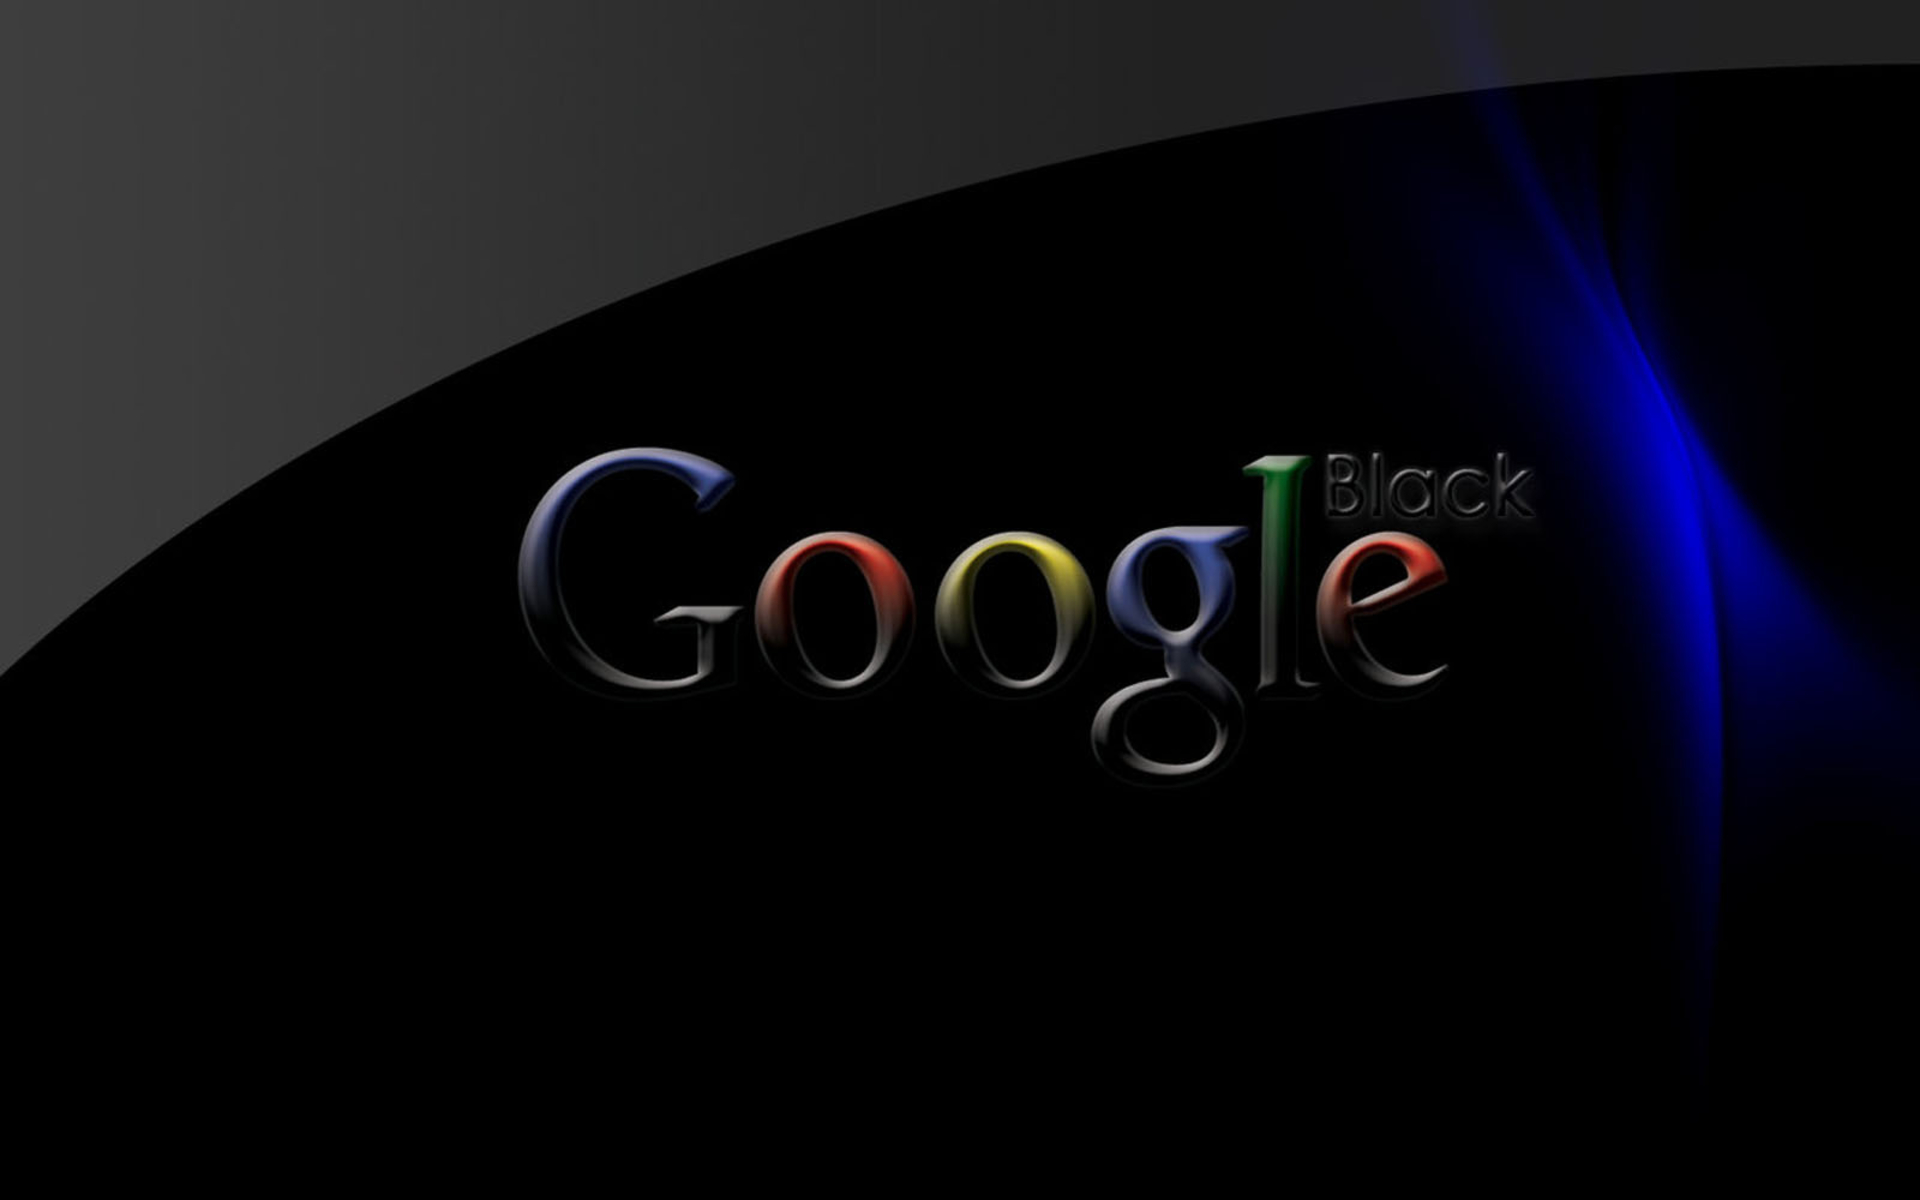 Add some personality to your desktop with the latest Black Google Wallpaper! With a wide selection of designs to choose from, you can find the perfect wallpaper that matches your style. The best part? You can download it for free! Click on the image to see how easy it is to upgrade your desktop!